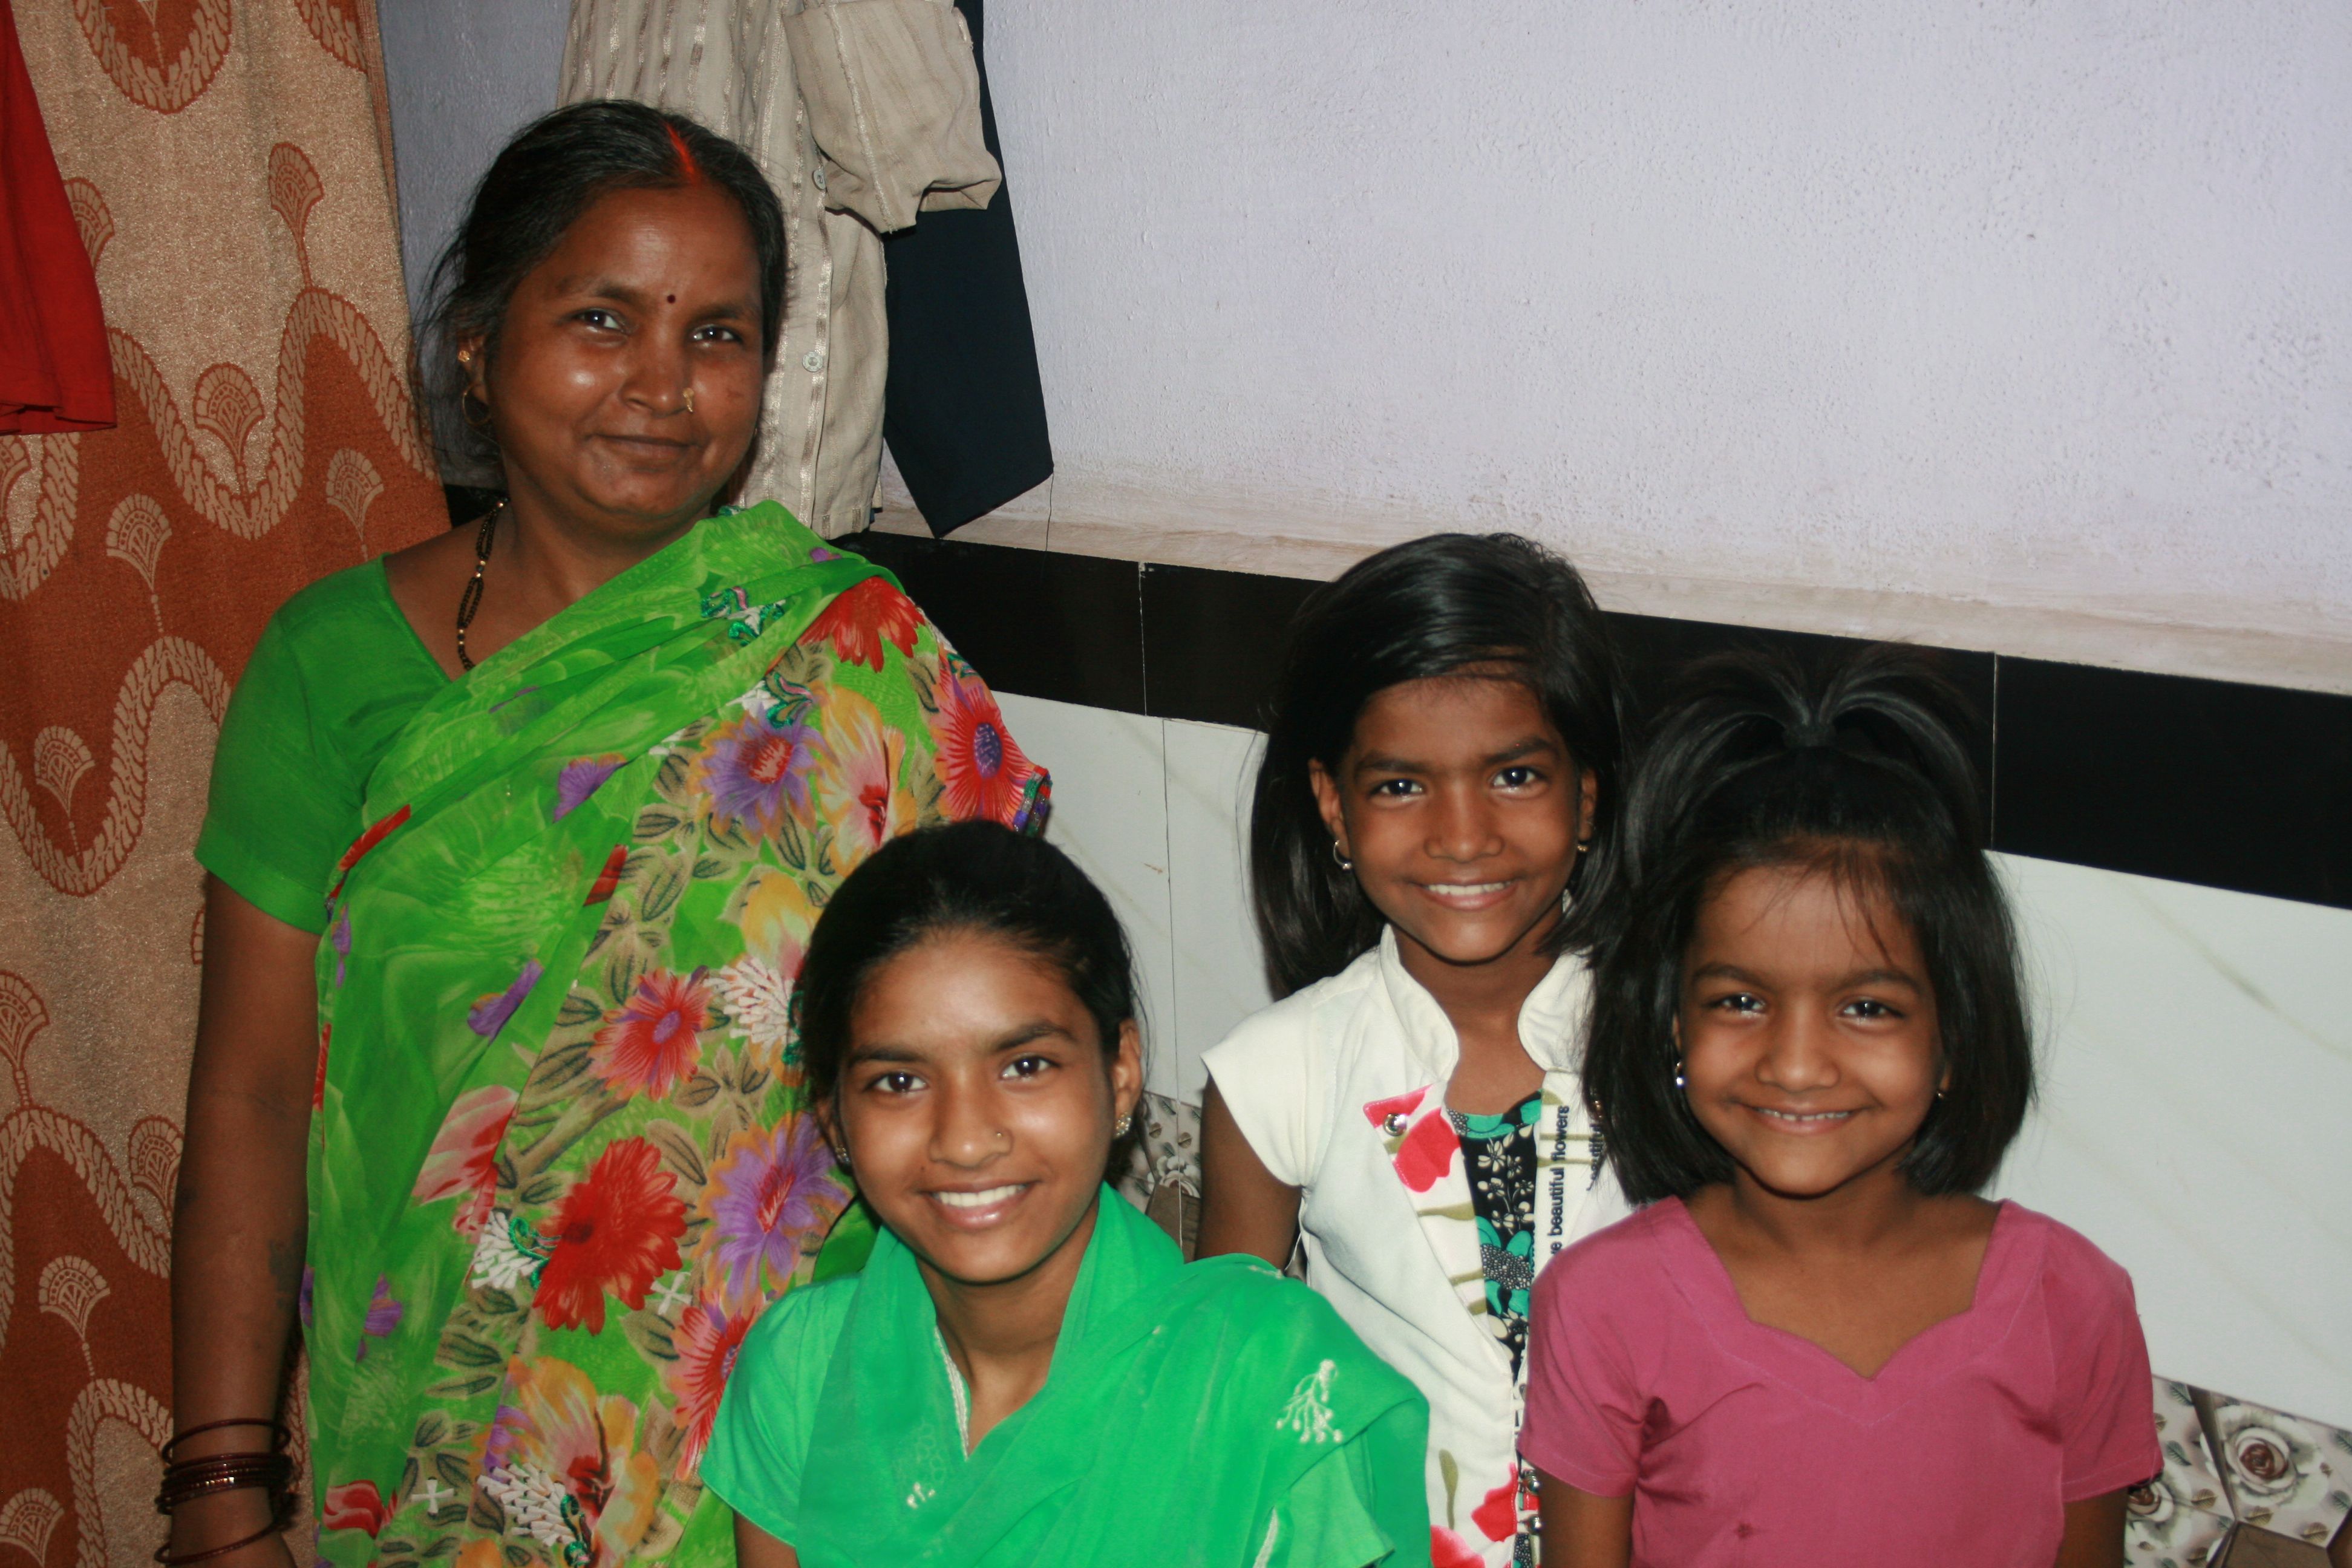 Rima Prajapati with daughters (from left) Jhoti, Aarti and Sangeeta. Jhoti and Aarti were both born deaf. Rima moved her daughters from their village to Mumbai so they could attend a school for the deaf. Image by Kate Petcosky-Kulkarni. India, 2016.